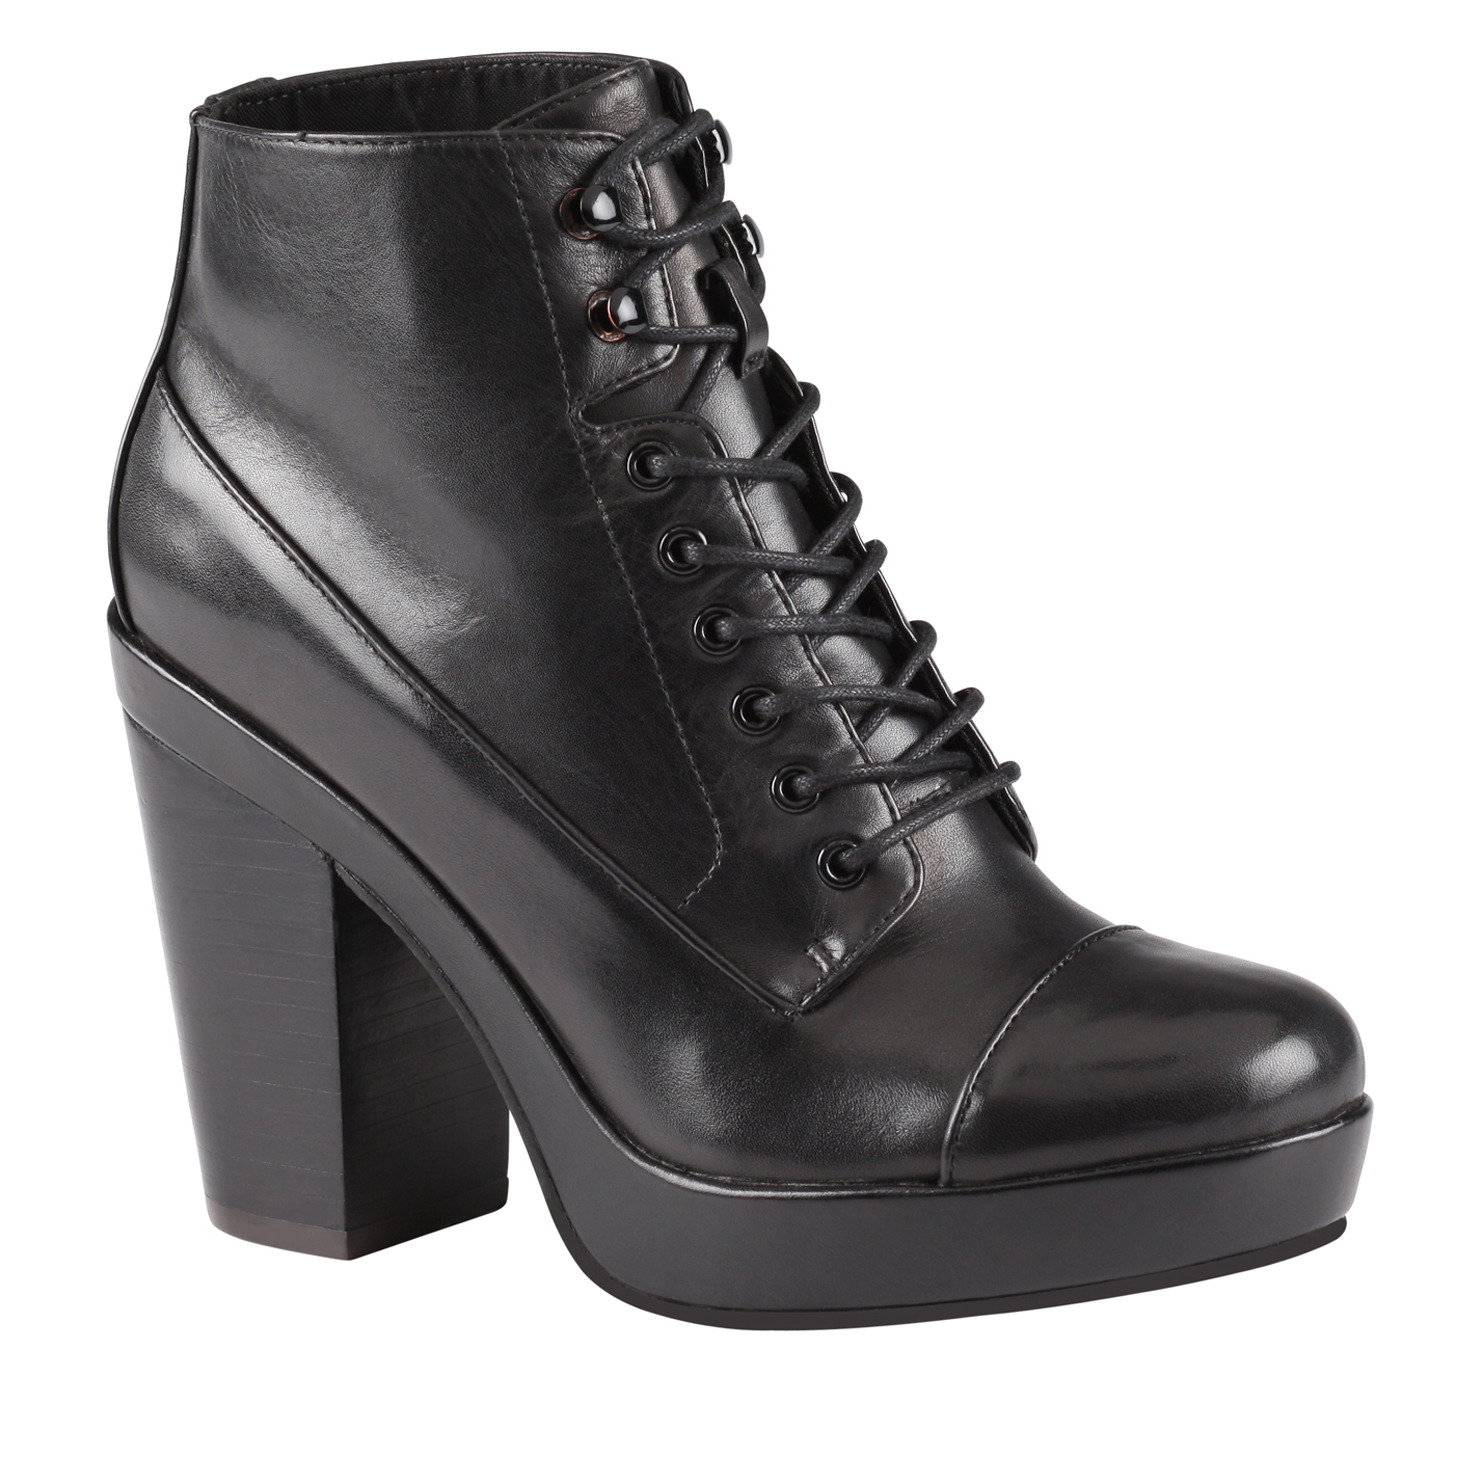 ALDO Leather Mathia Stacked Heel Ankle Boots in Black - Lyst